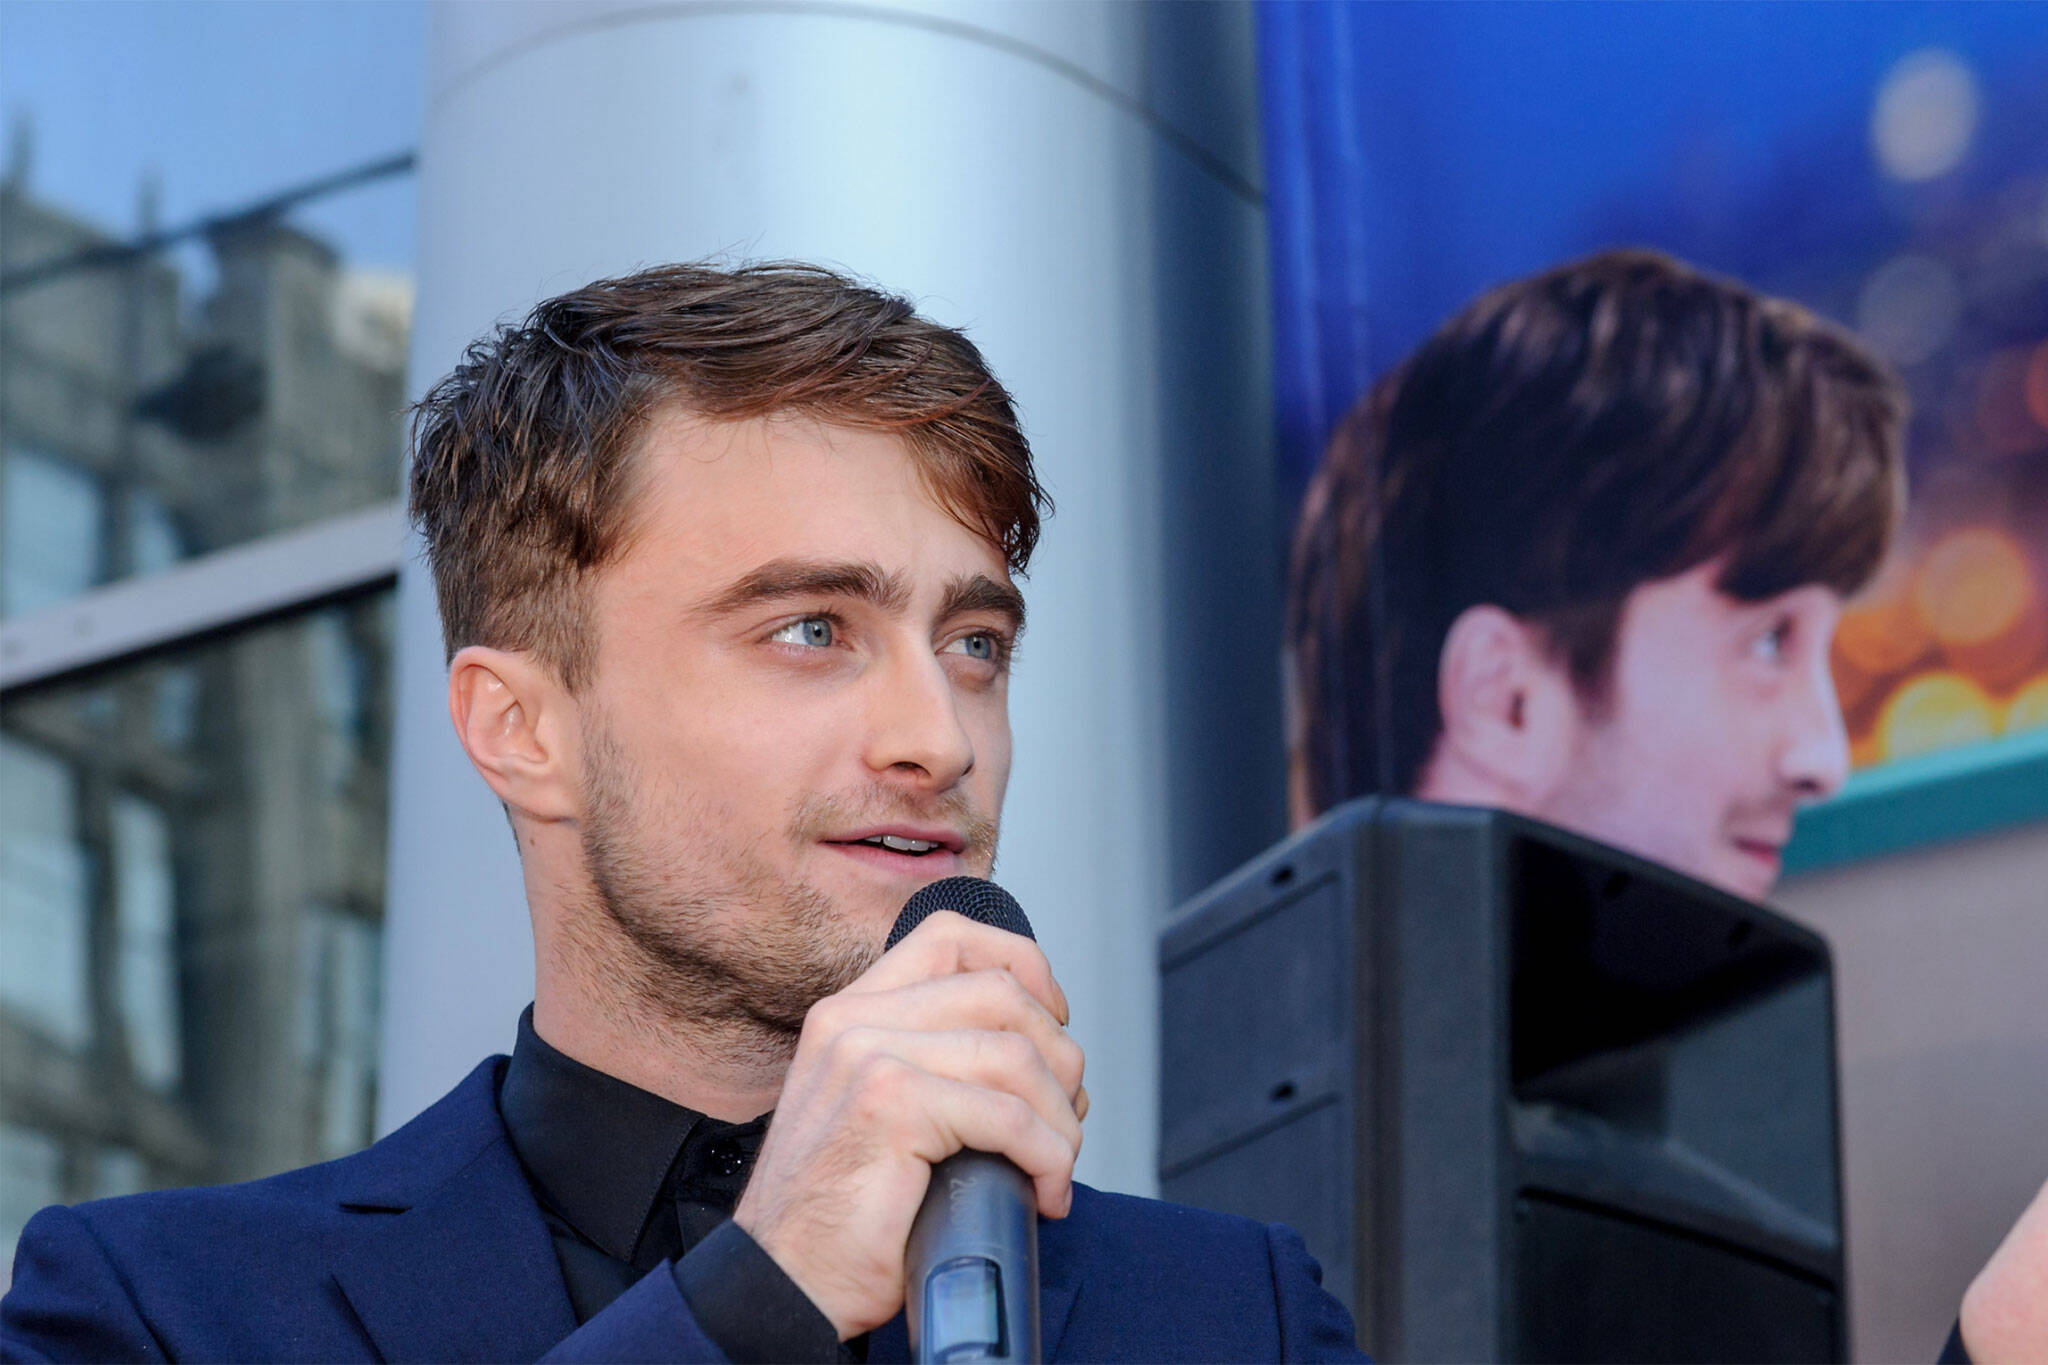 Daniel Radcliffe is casually hanging out in Canada right now